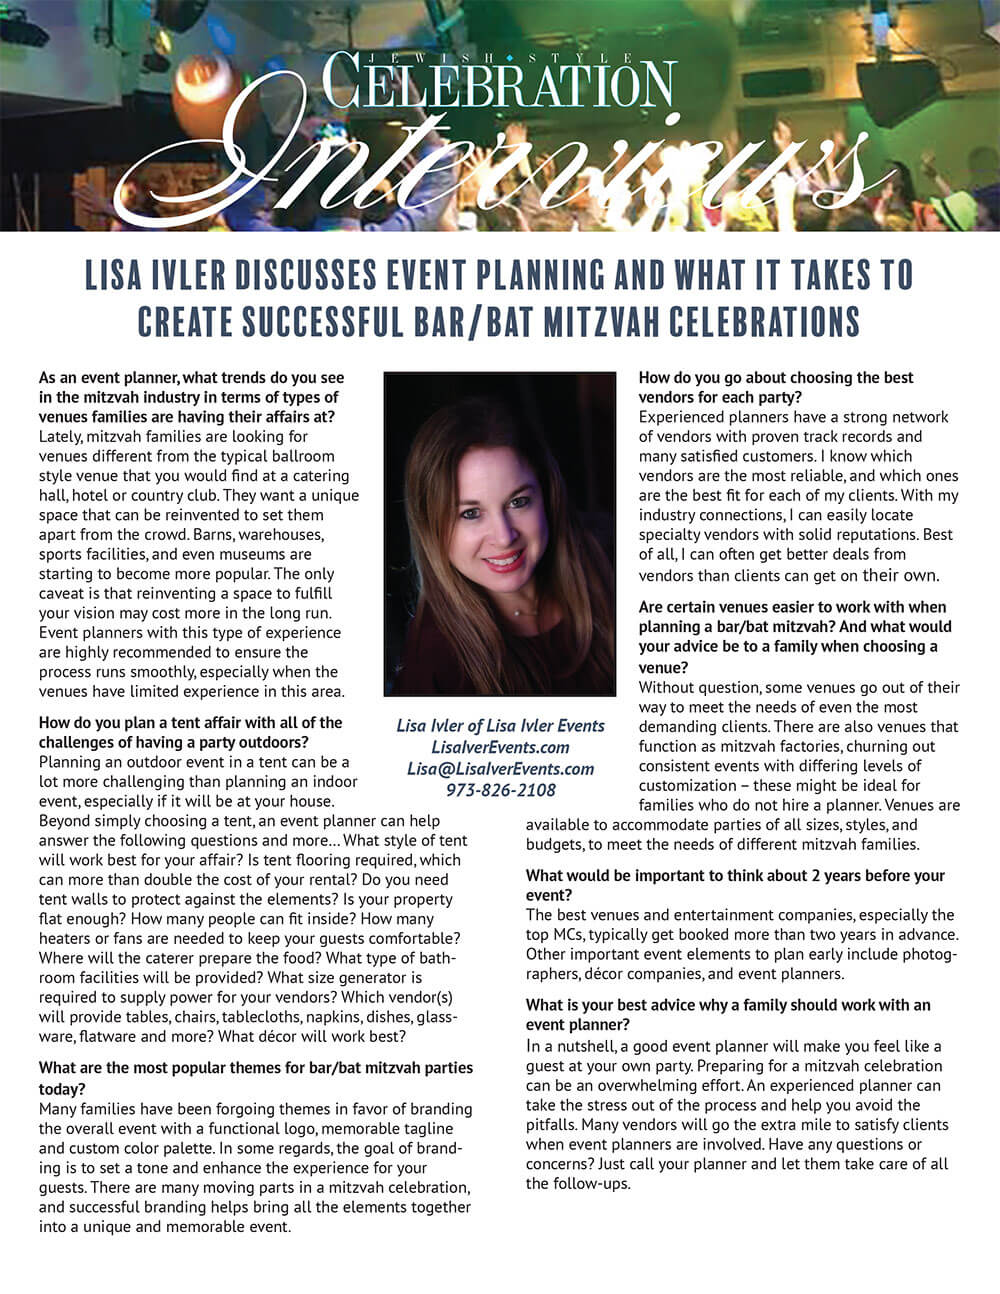 Promotional flyer featuring lisa miller, an event planner, with text detailing tips on creating successful events and bat/bar mitzvah celebrations. contact details are included.